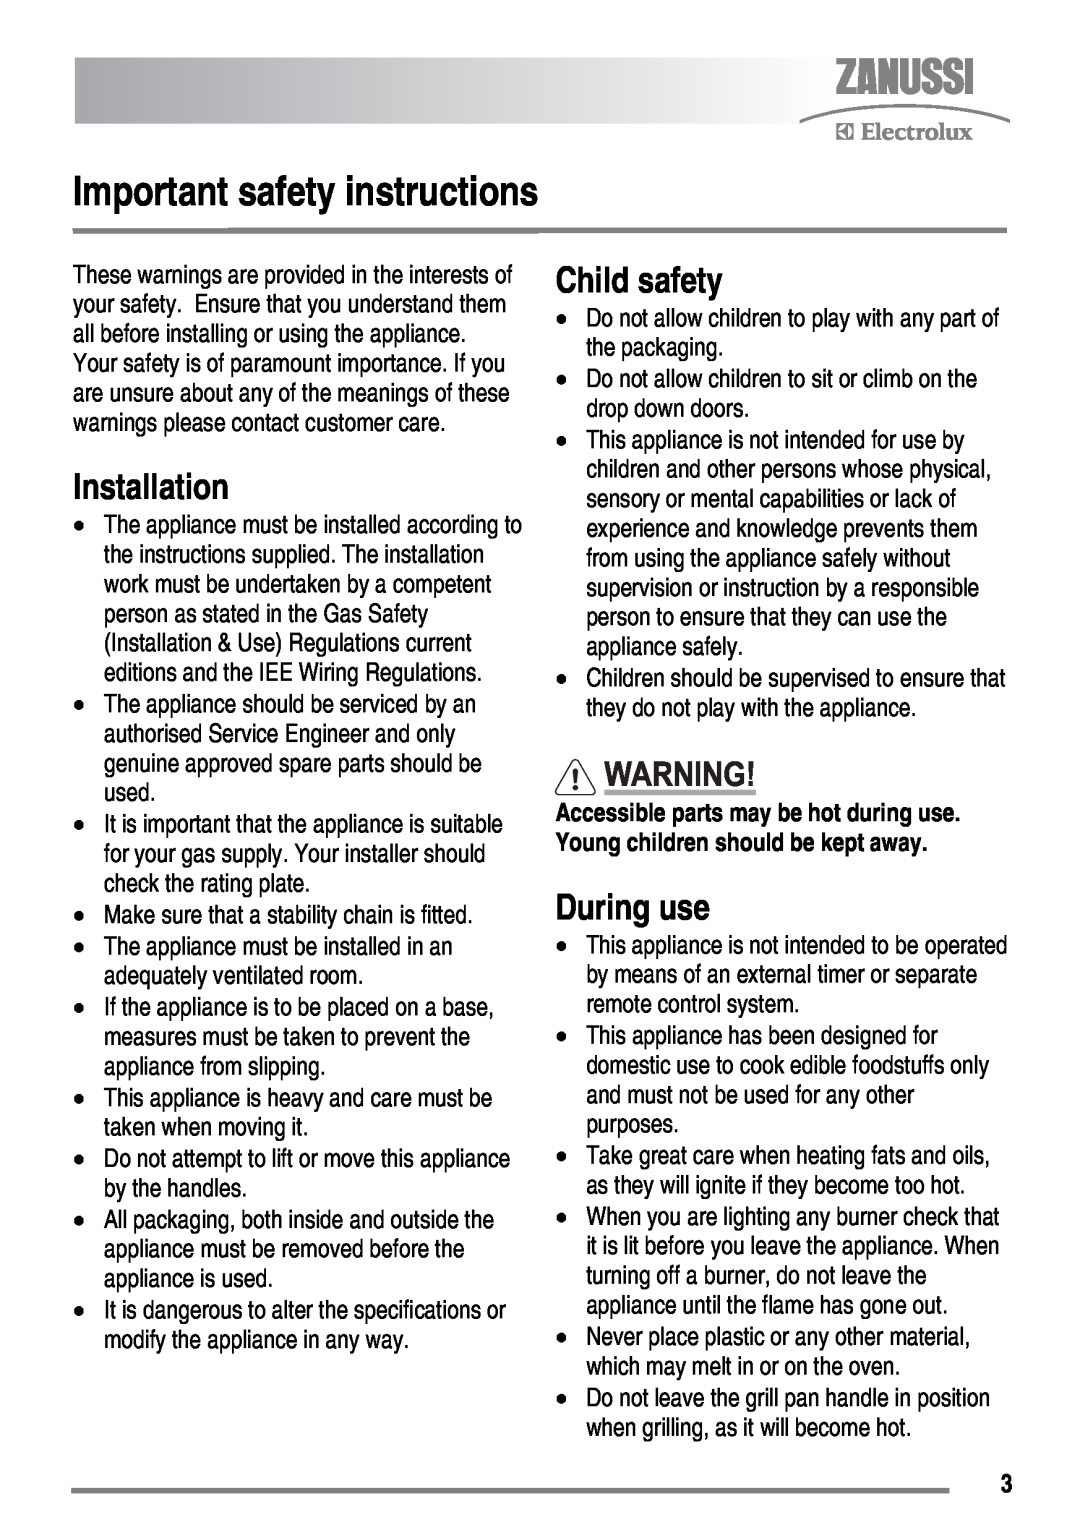 Zanussi ZKM6040 user manual Important safety instructions, Installation, Child safety, During use 